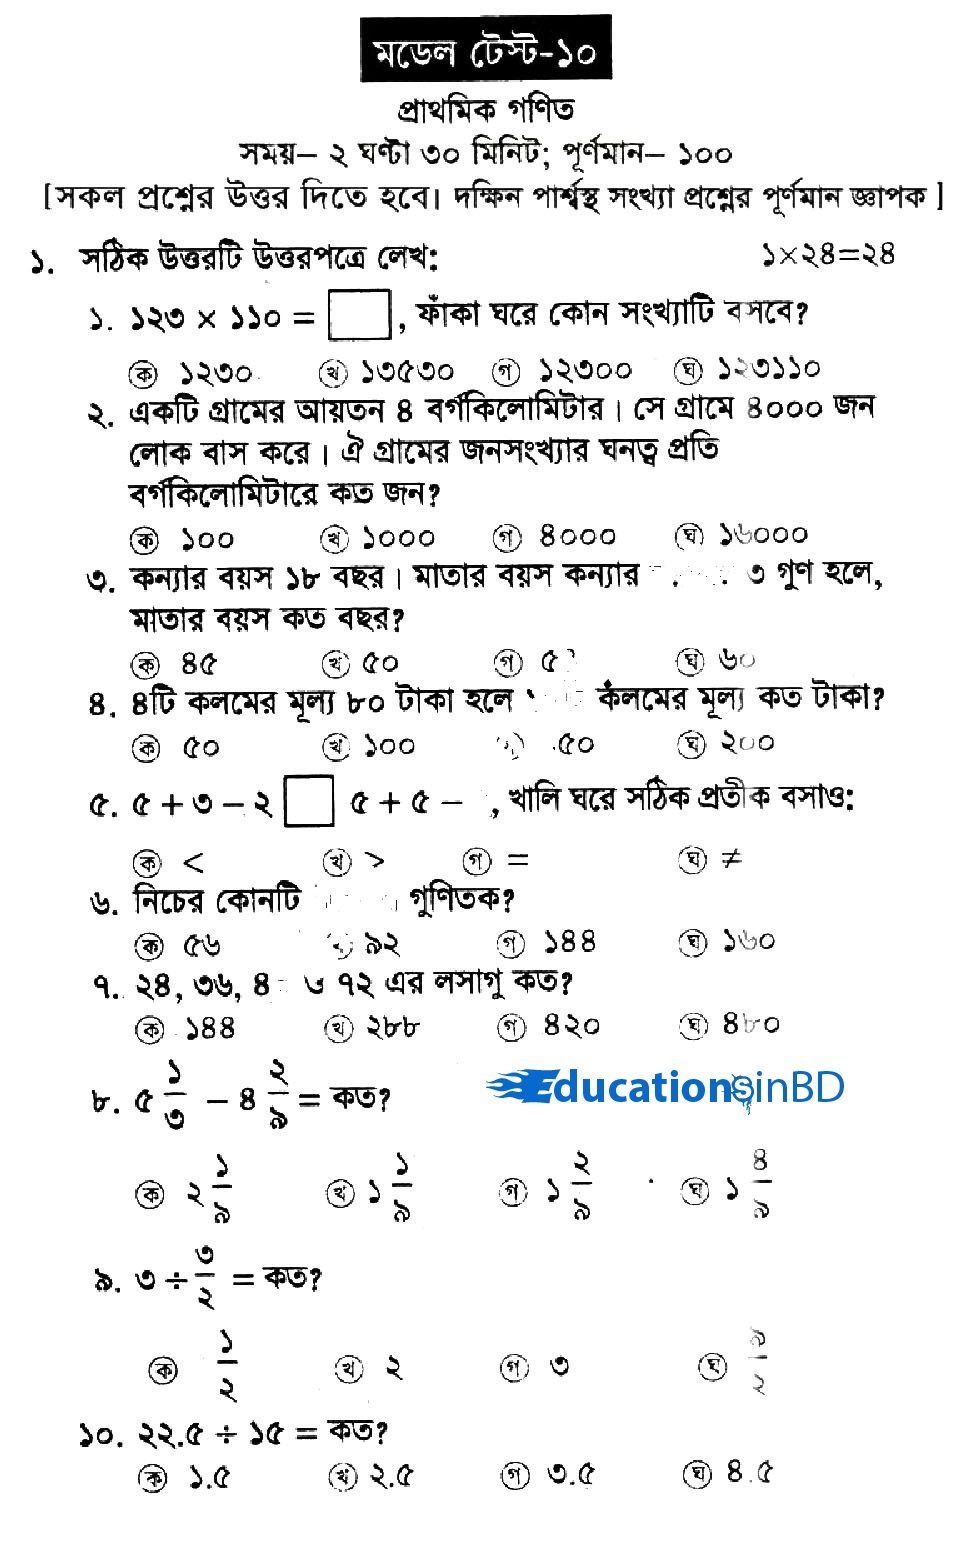 PSC Math Suggestion 2018 All Education Board